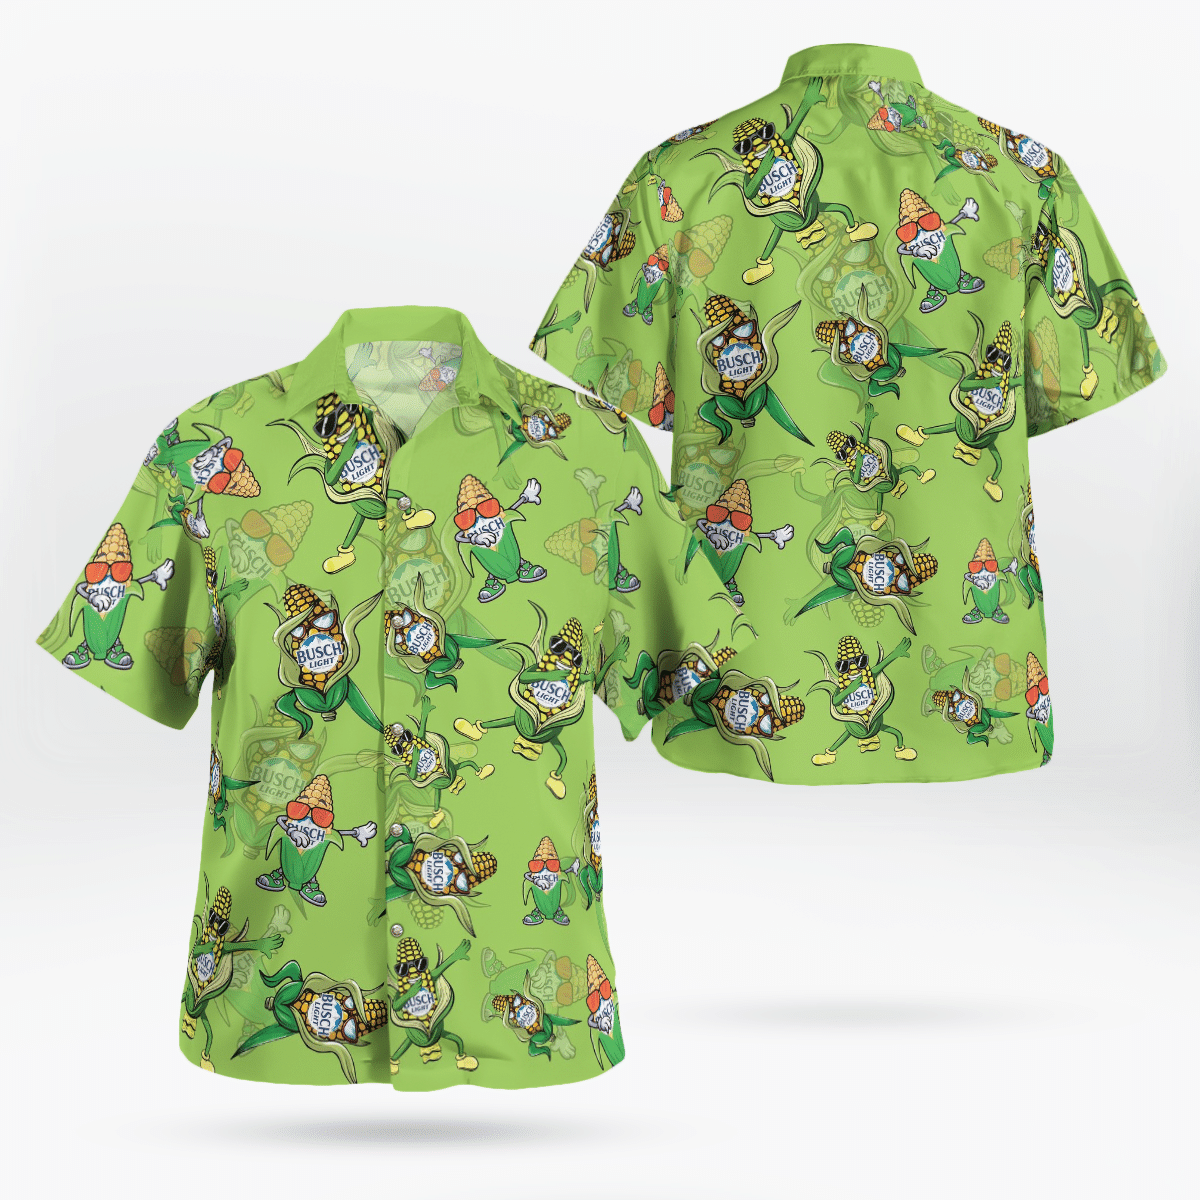 Top cool Hawaiian shirt 2022 - Make sure you get yours today before they run out! 7